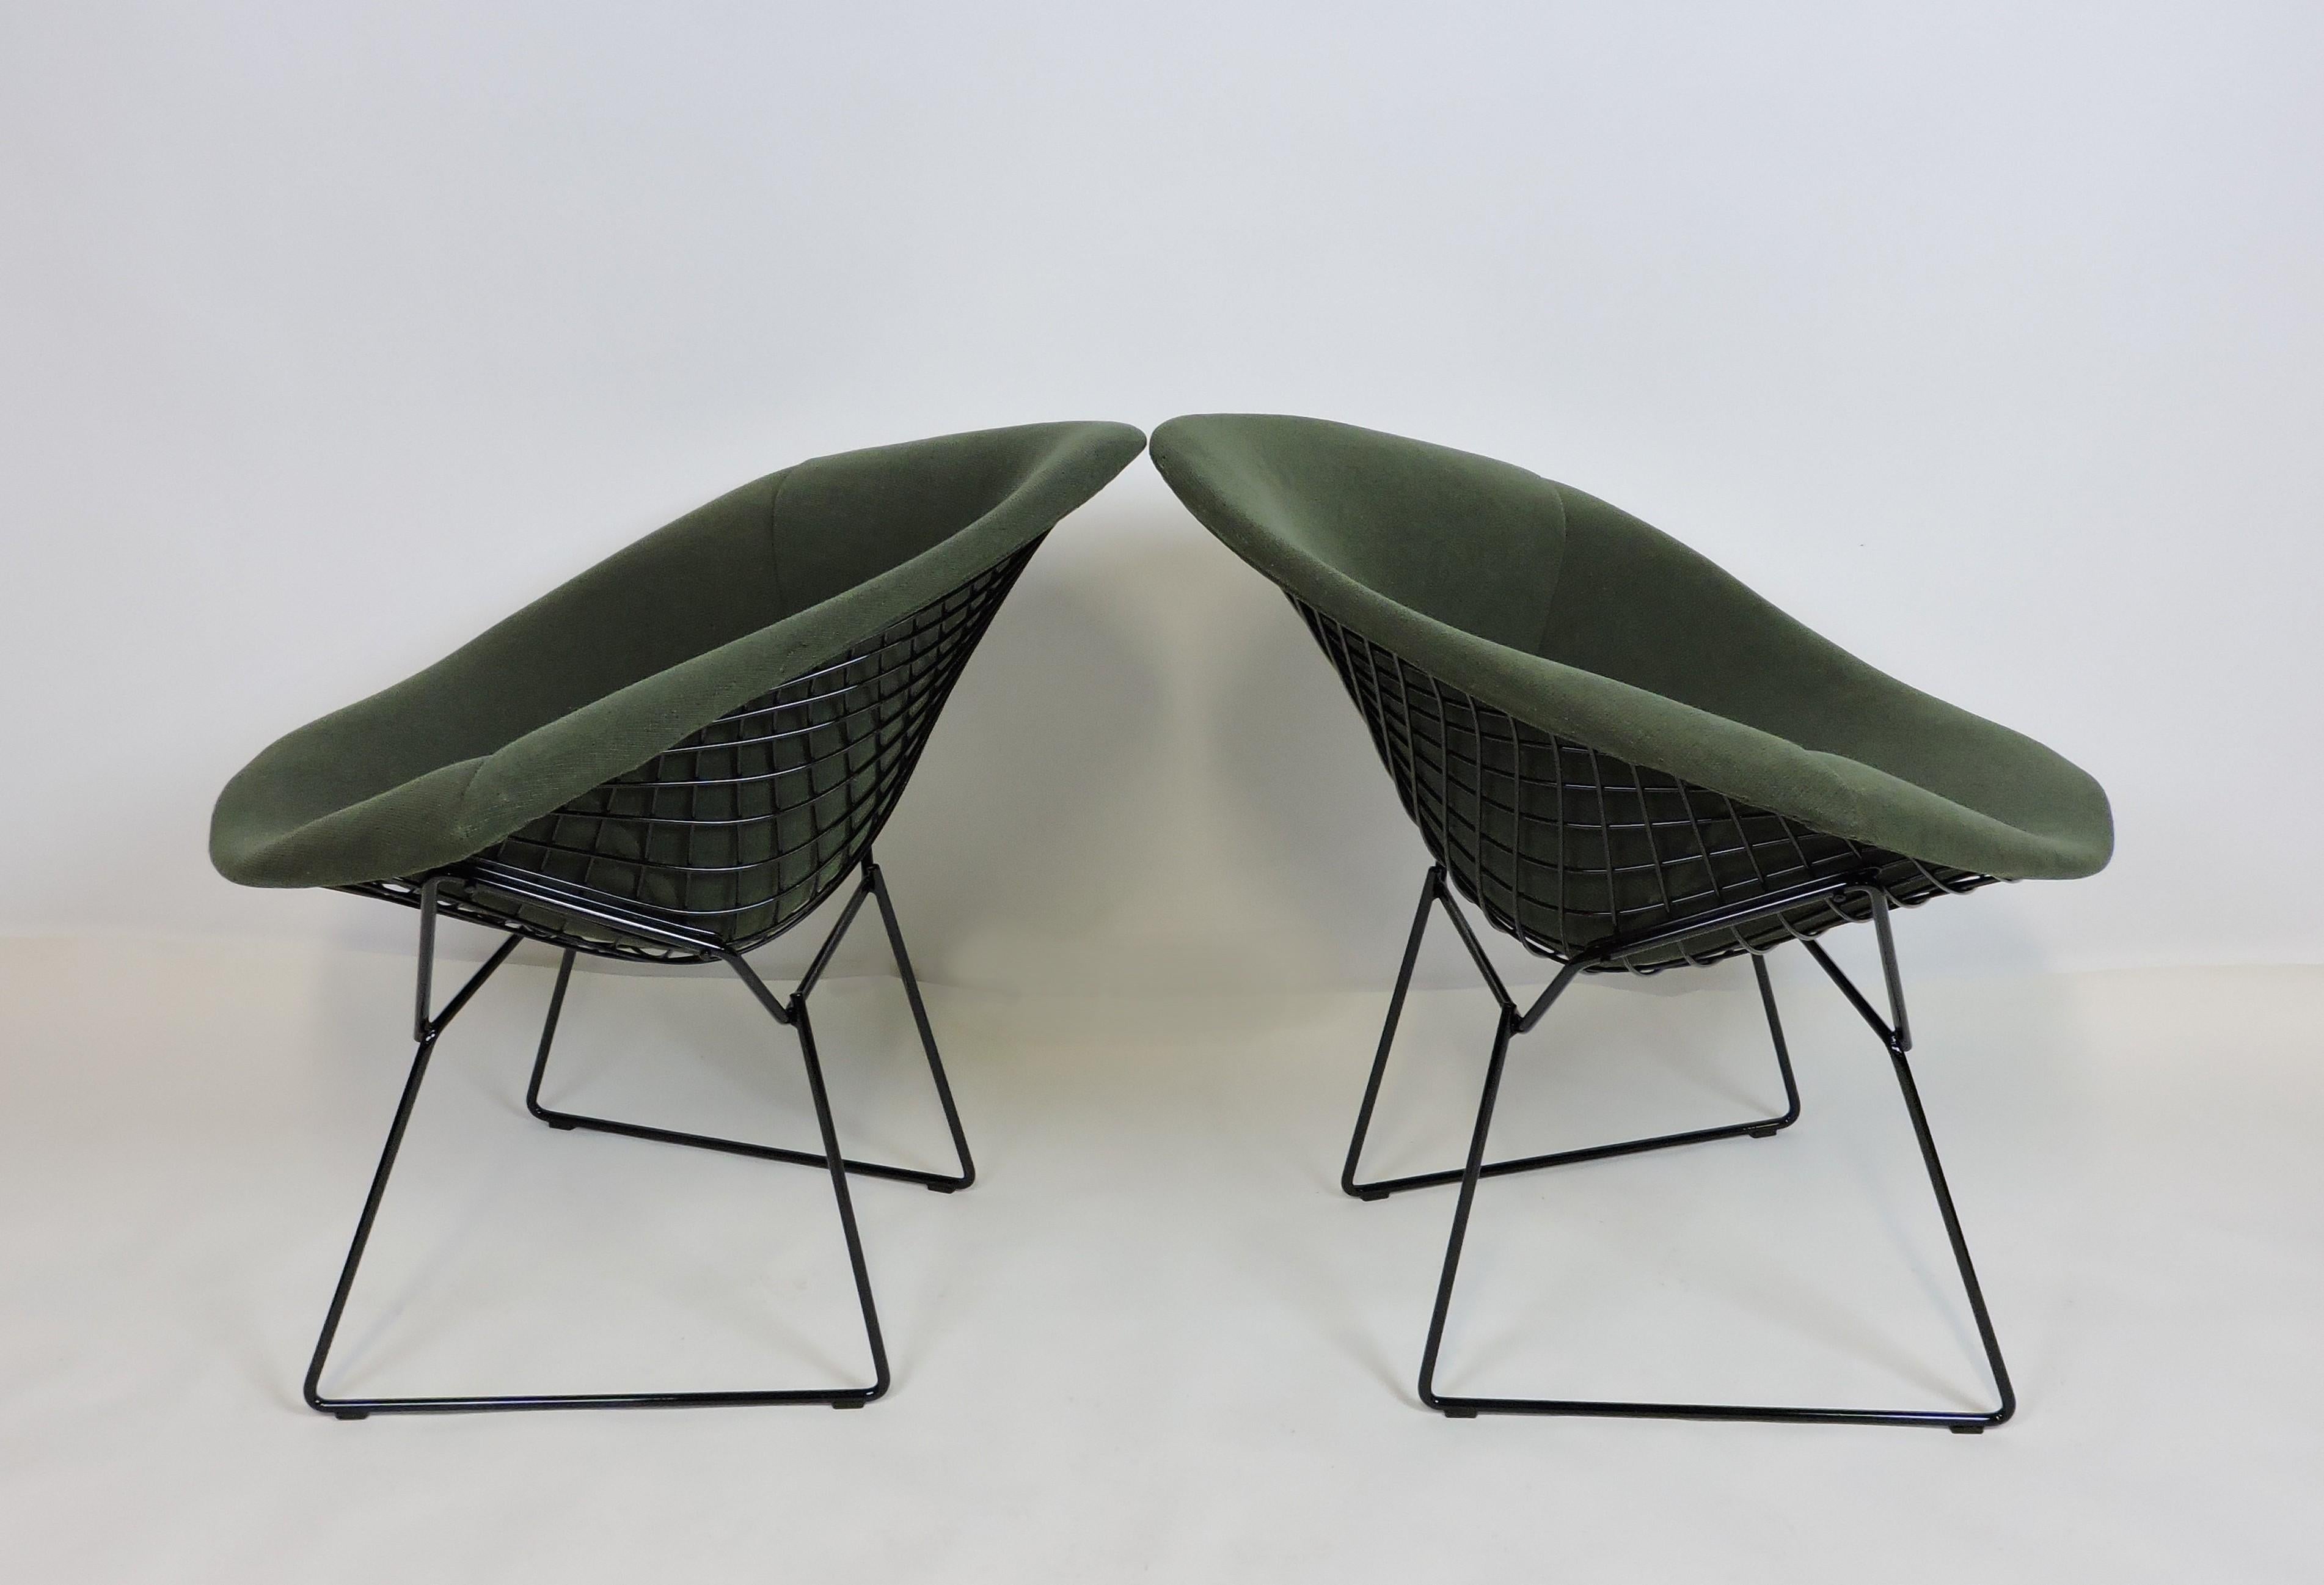 Classic wire diamond chairs designed by Harry Bertoia and manufactured by Knoll. These chairs have the original full covers in a lovely green fabric and have been freshly powder coated in a black gloss finish. Knoll labels on covers and Knoll stamp